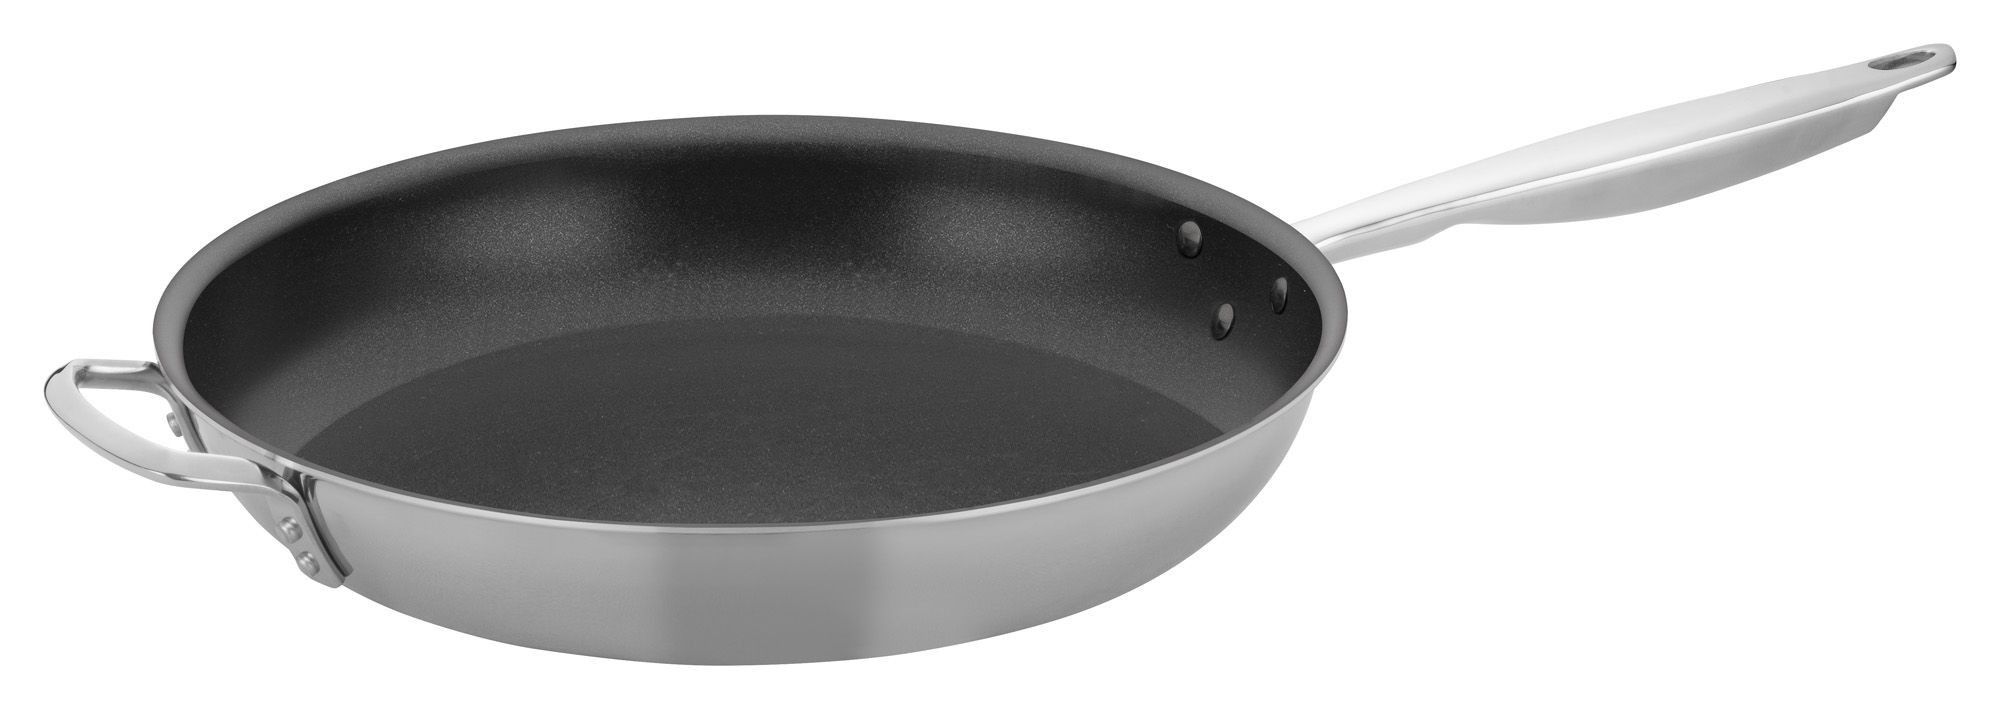 Winco TGFP-14NS Tri-Ply Excalibur Stainless Steel Non-Stick 14" Fry Pan